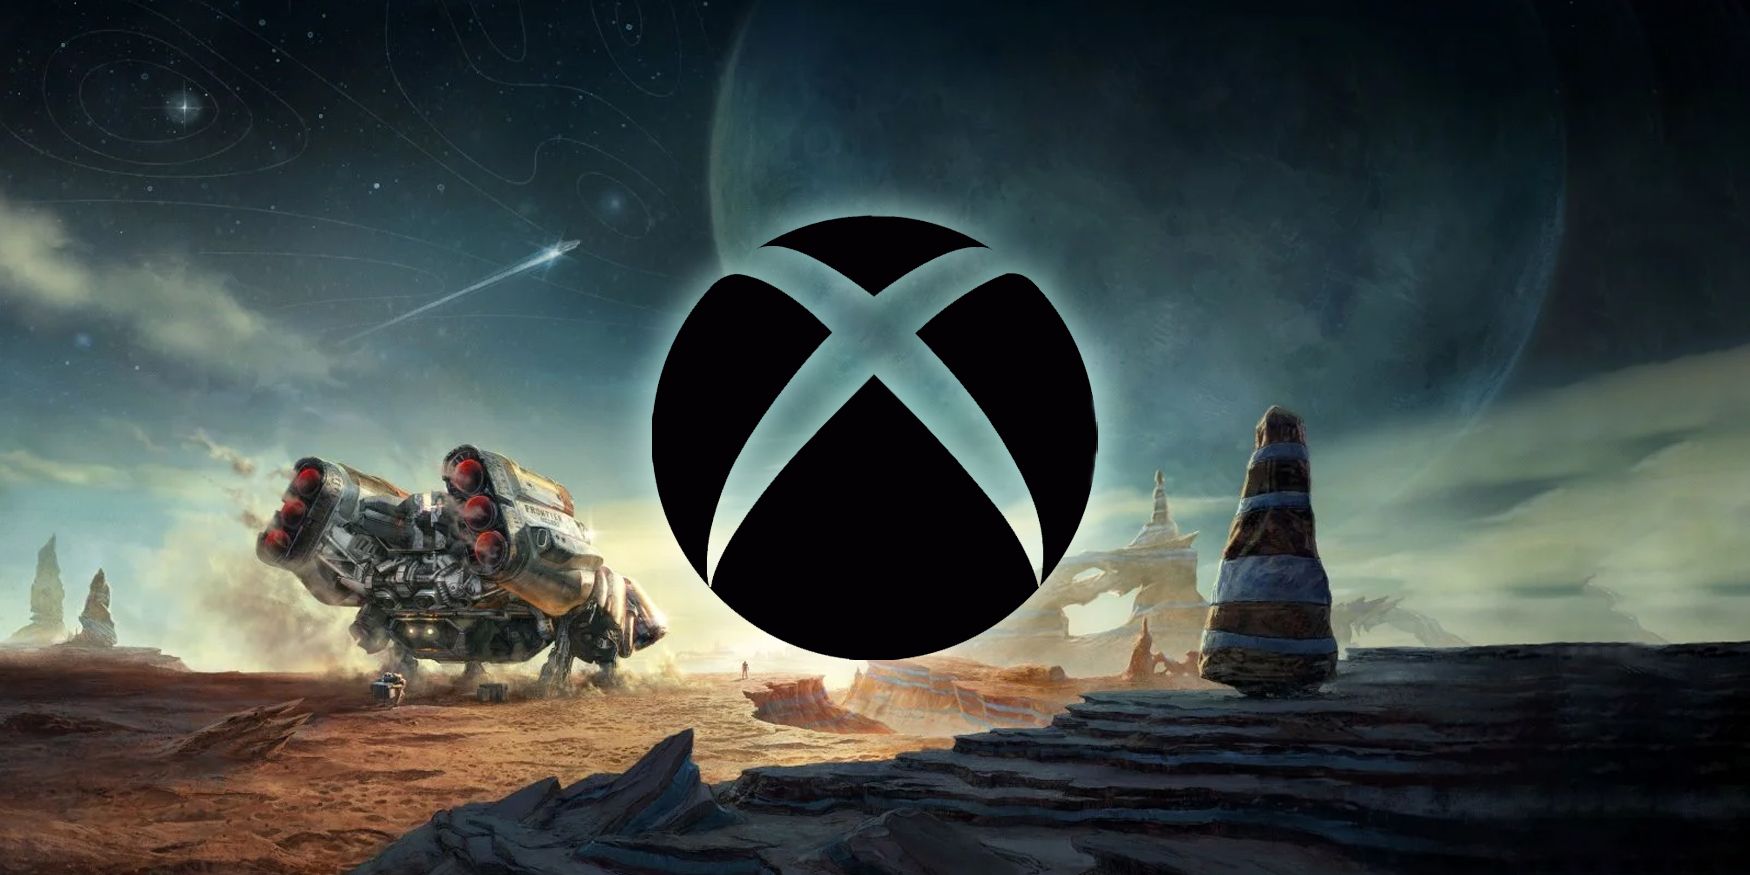 The Xbox logo floats above a scene of a dusty, barren planet from Starfield. A rover lands on the planet's surface at left, while another ship streaks through the sky above.